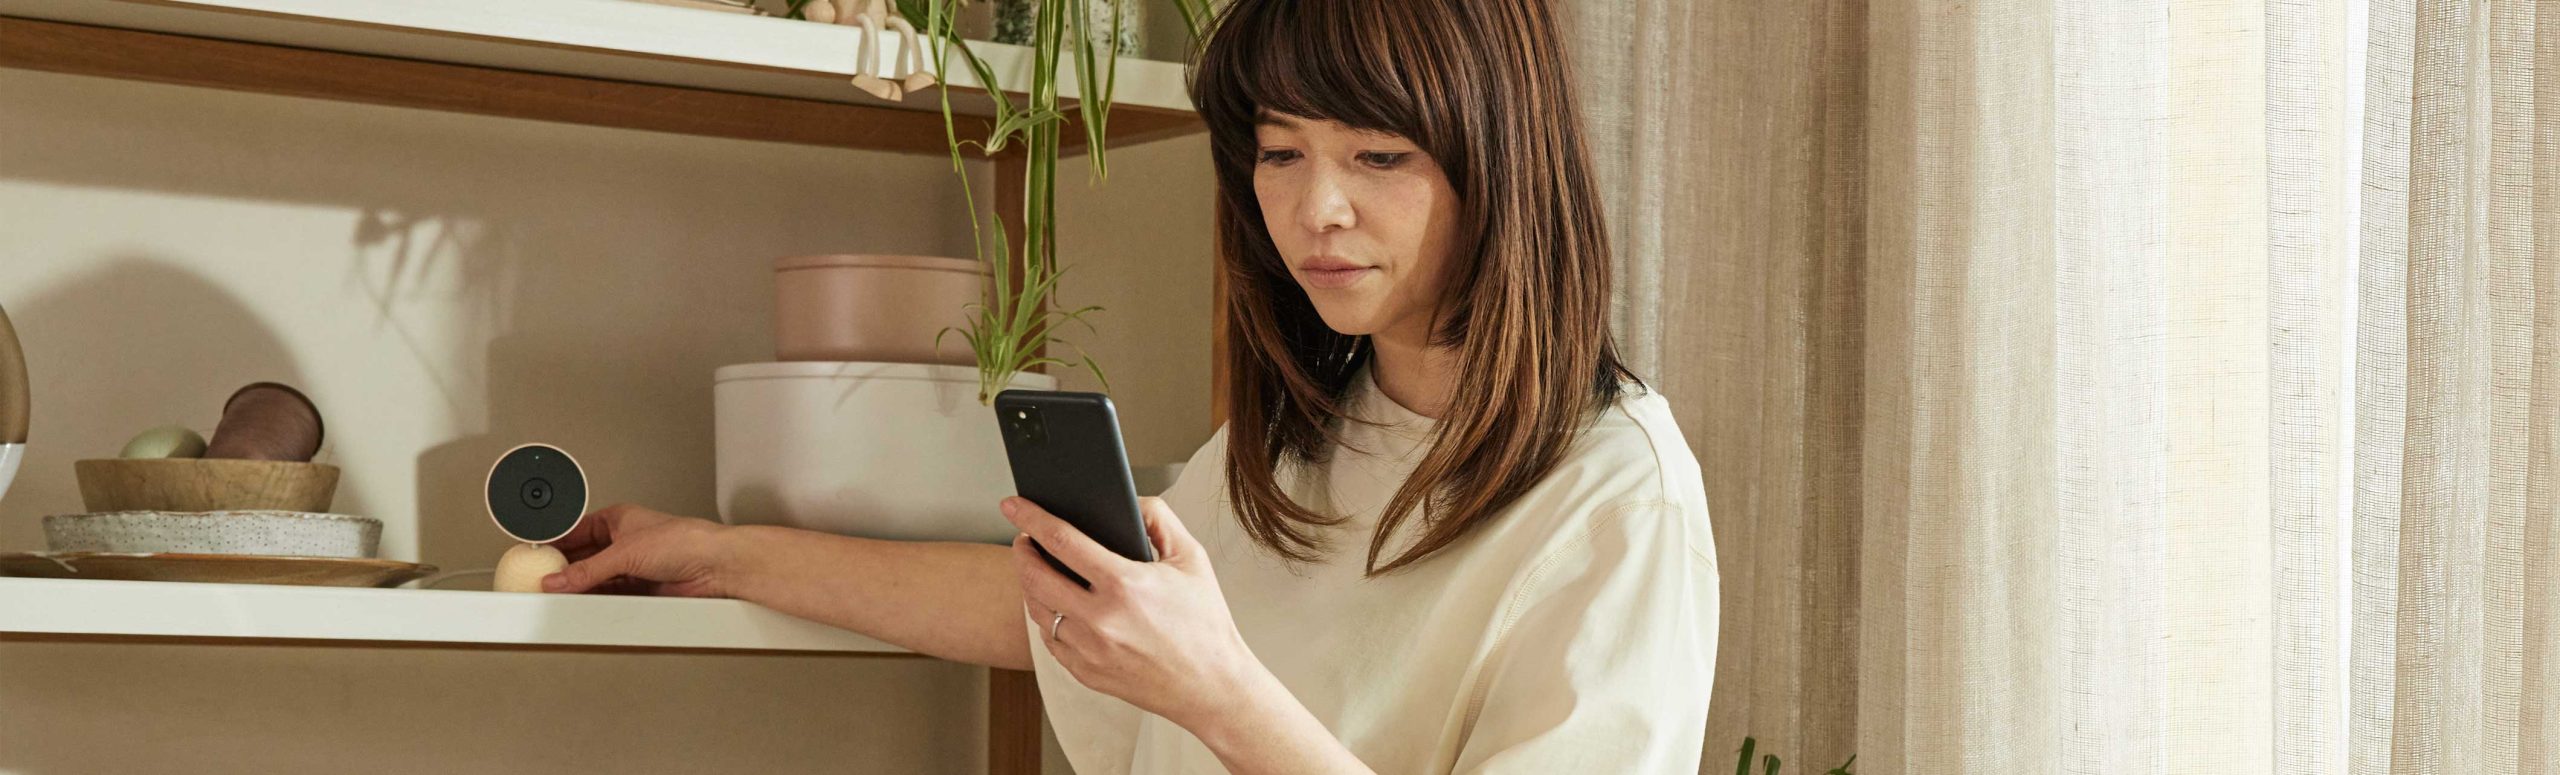 Woman looking at smart phone in configuring google nest at home